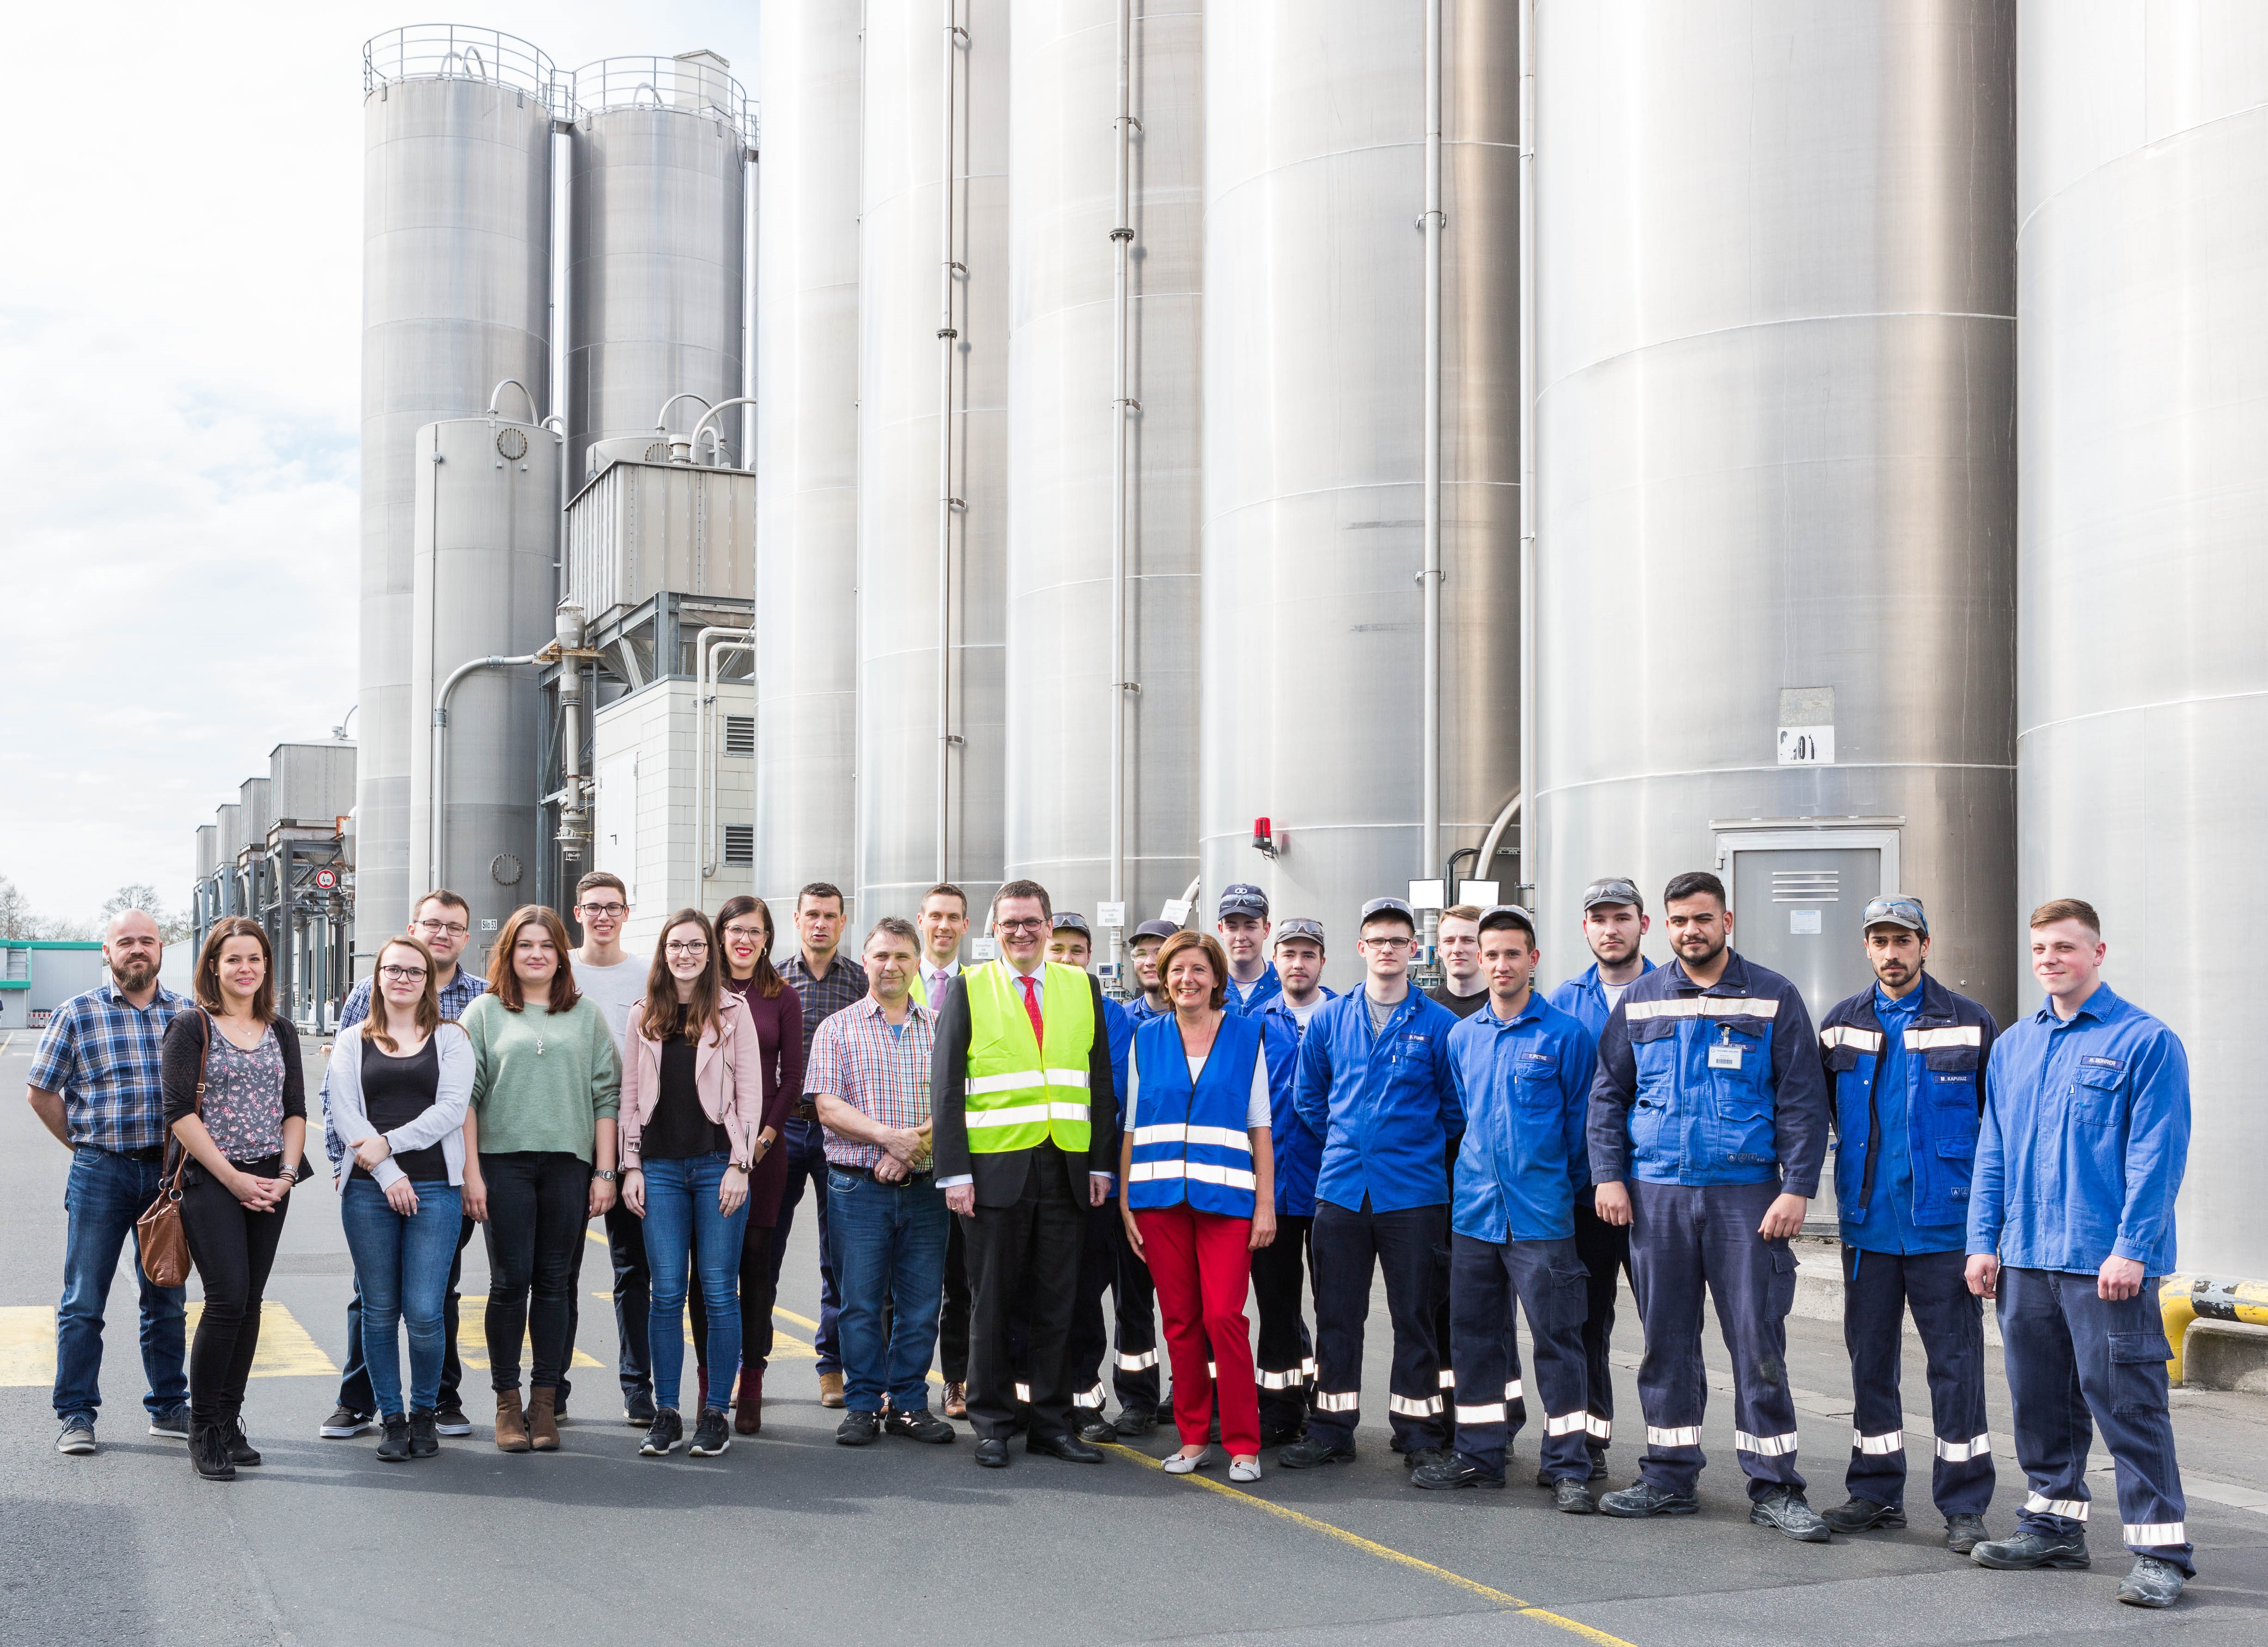 State Premier Malu Dreyer together with Dr. Gerald Hauf, as well as apprentices and trainers from the Polymer-Group.